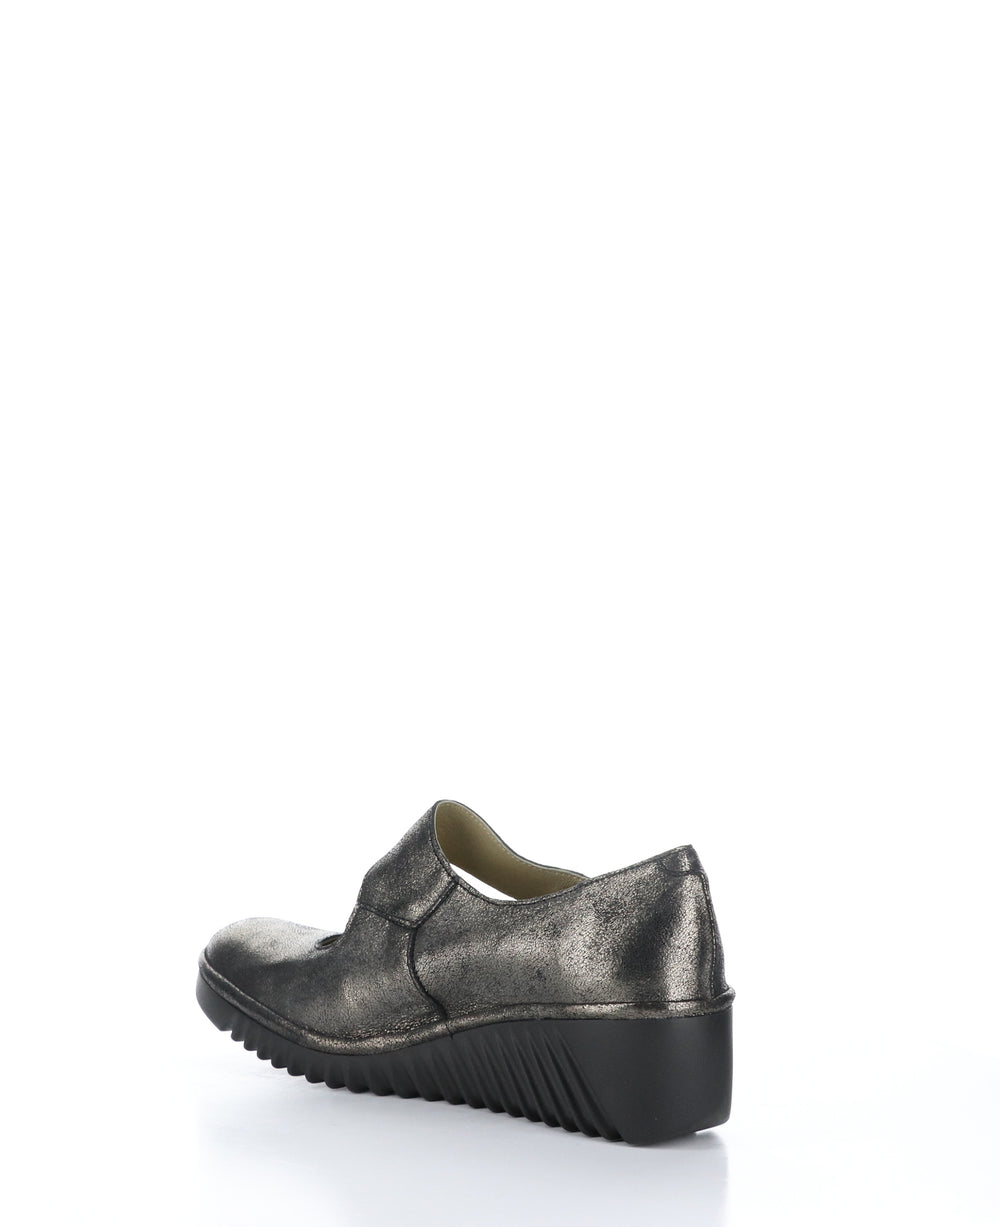 LYKA350FLY Graphite Round Toe Shoes|LYKA350FLY Chaussures à Bout Rond in Gris